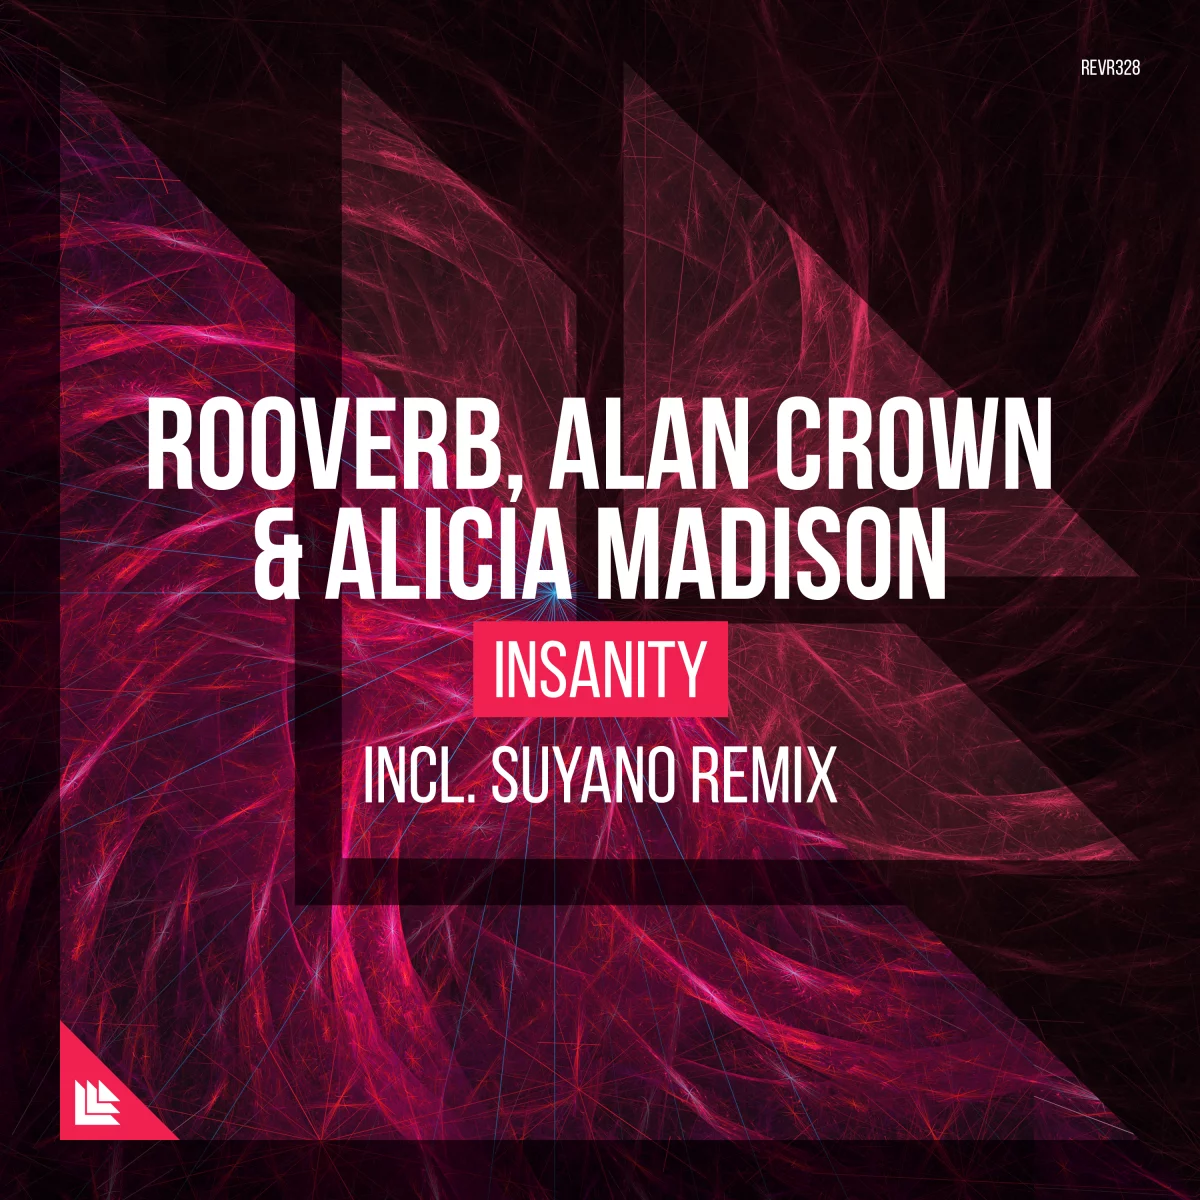 Insanity (incl. Suyano Remix) - Rooverb & Alan Crown & Alicia Madison